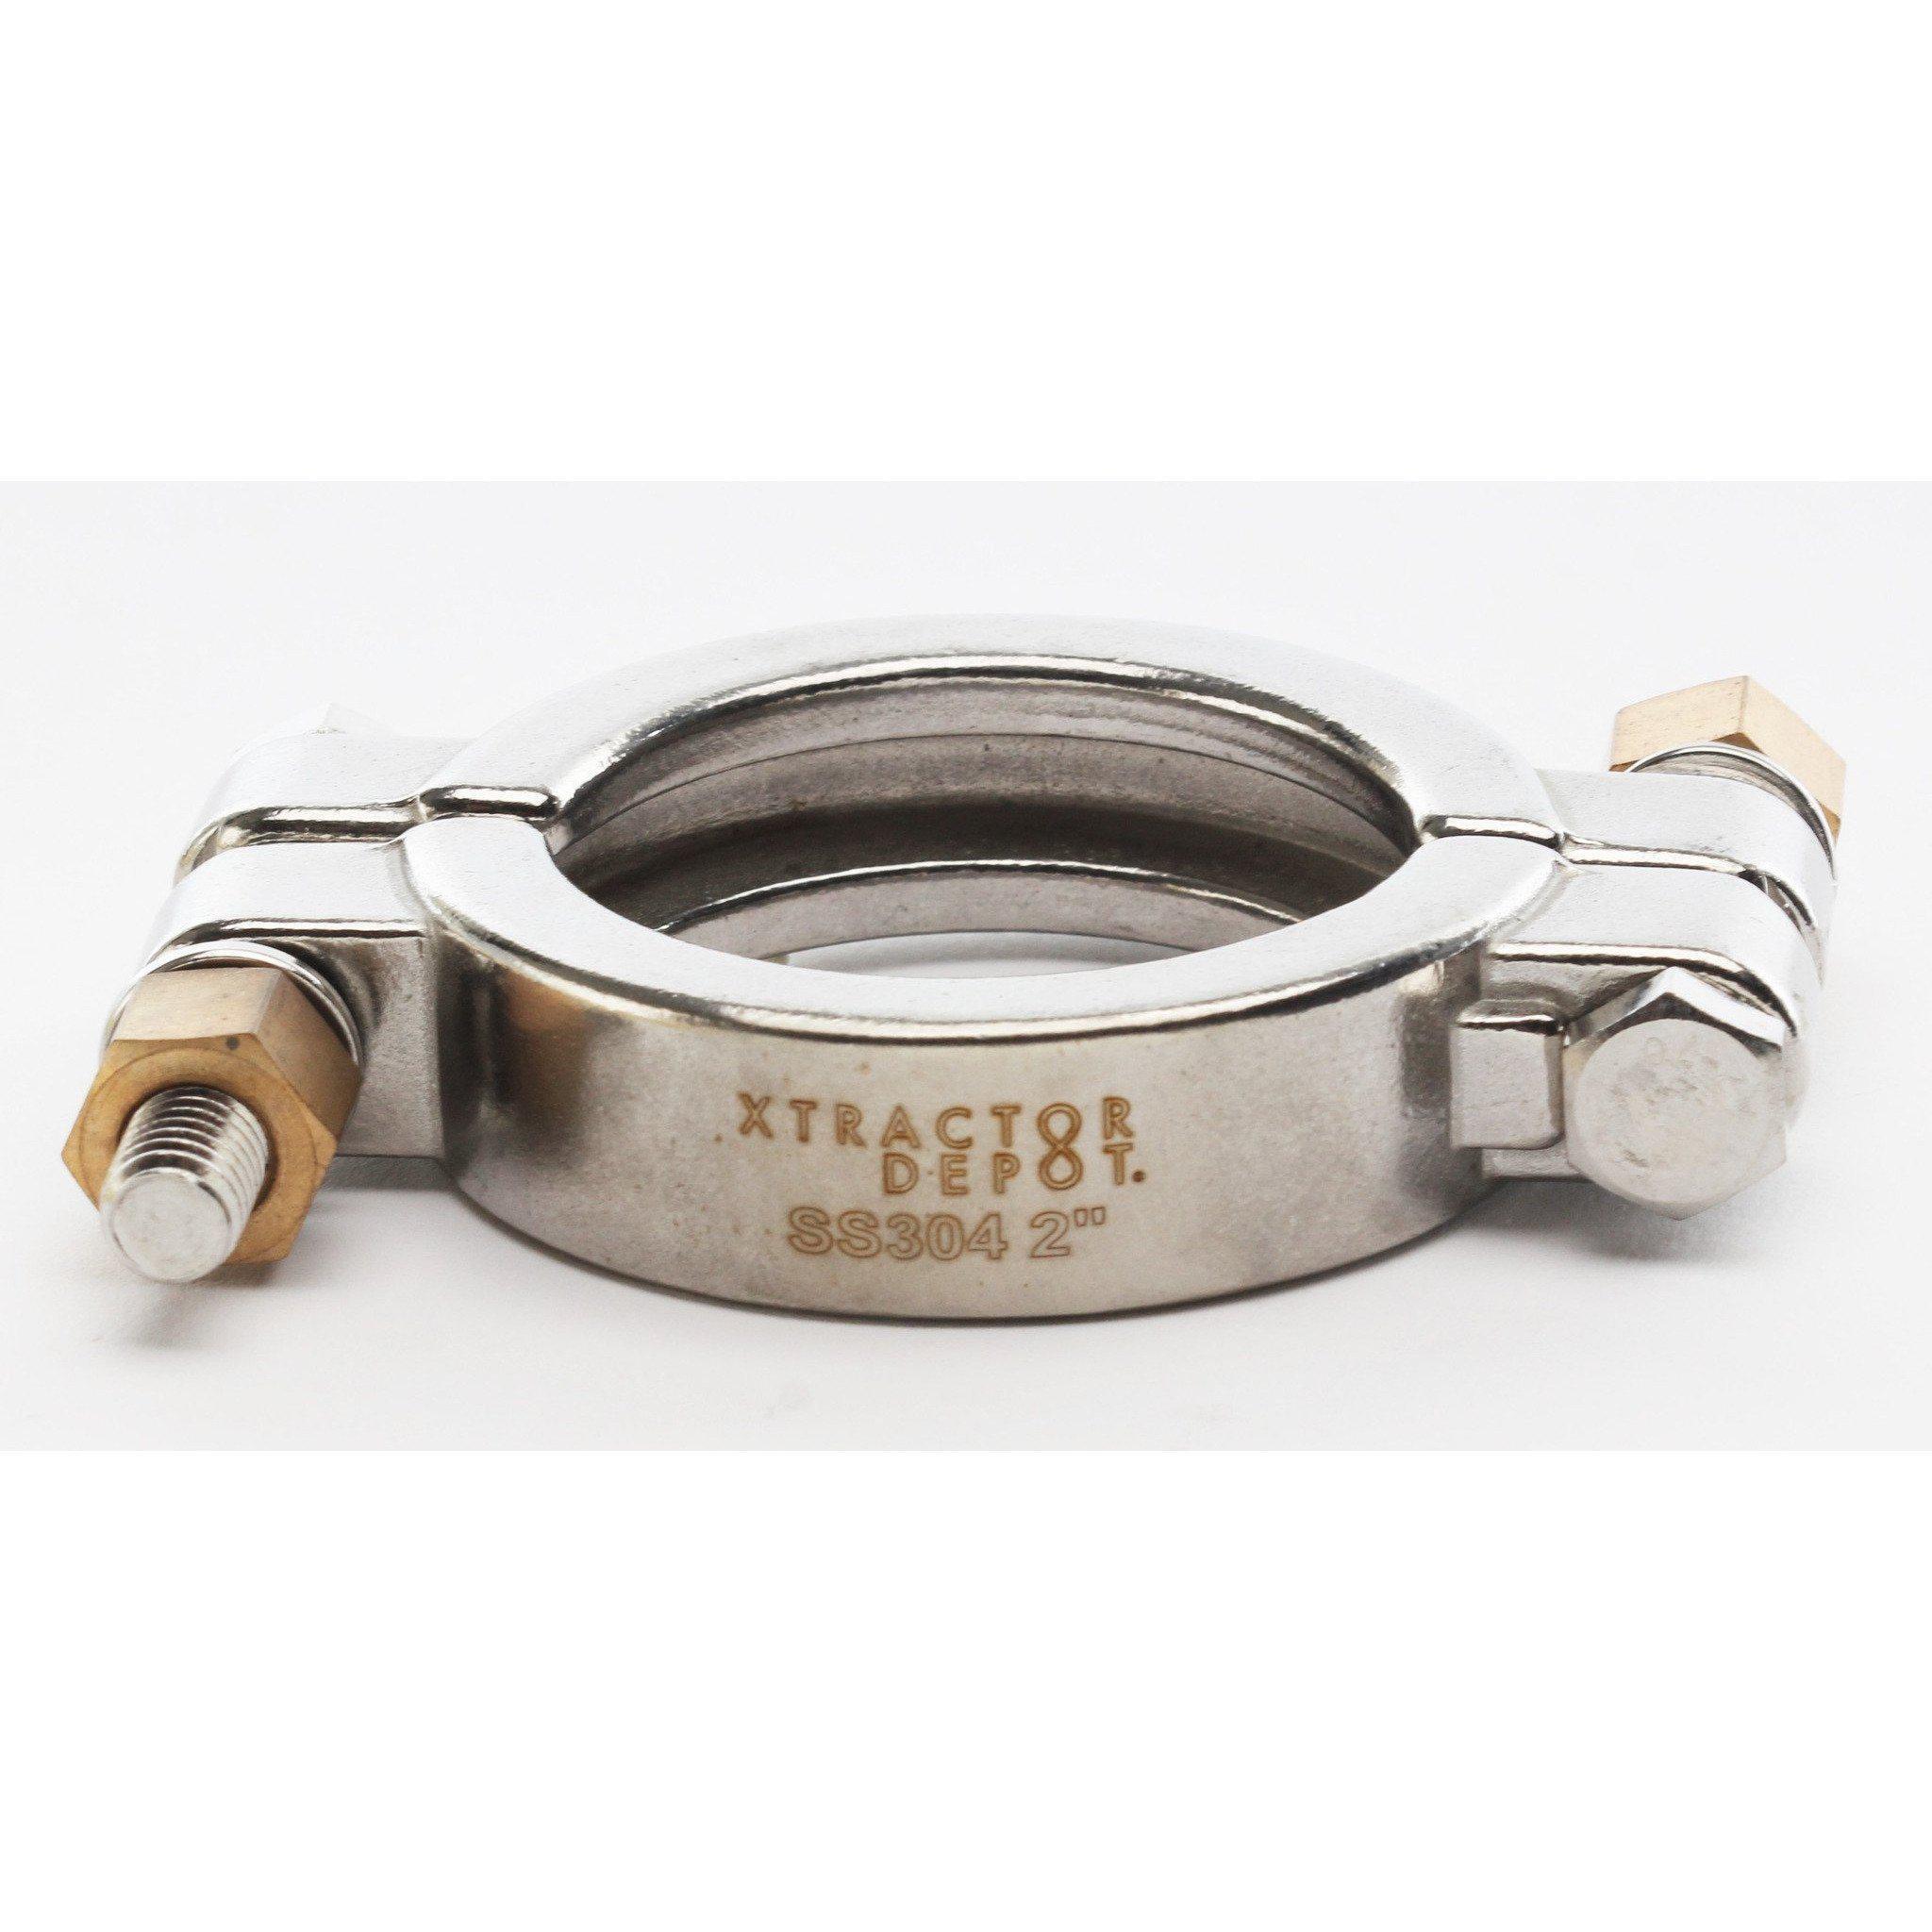 Heavy Duty High Pressure Clamps